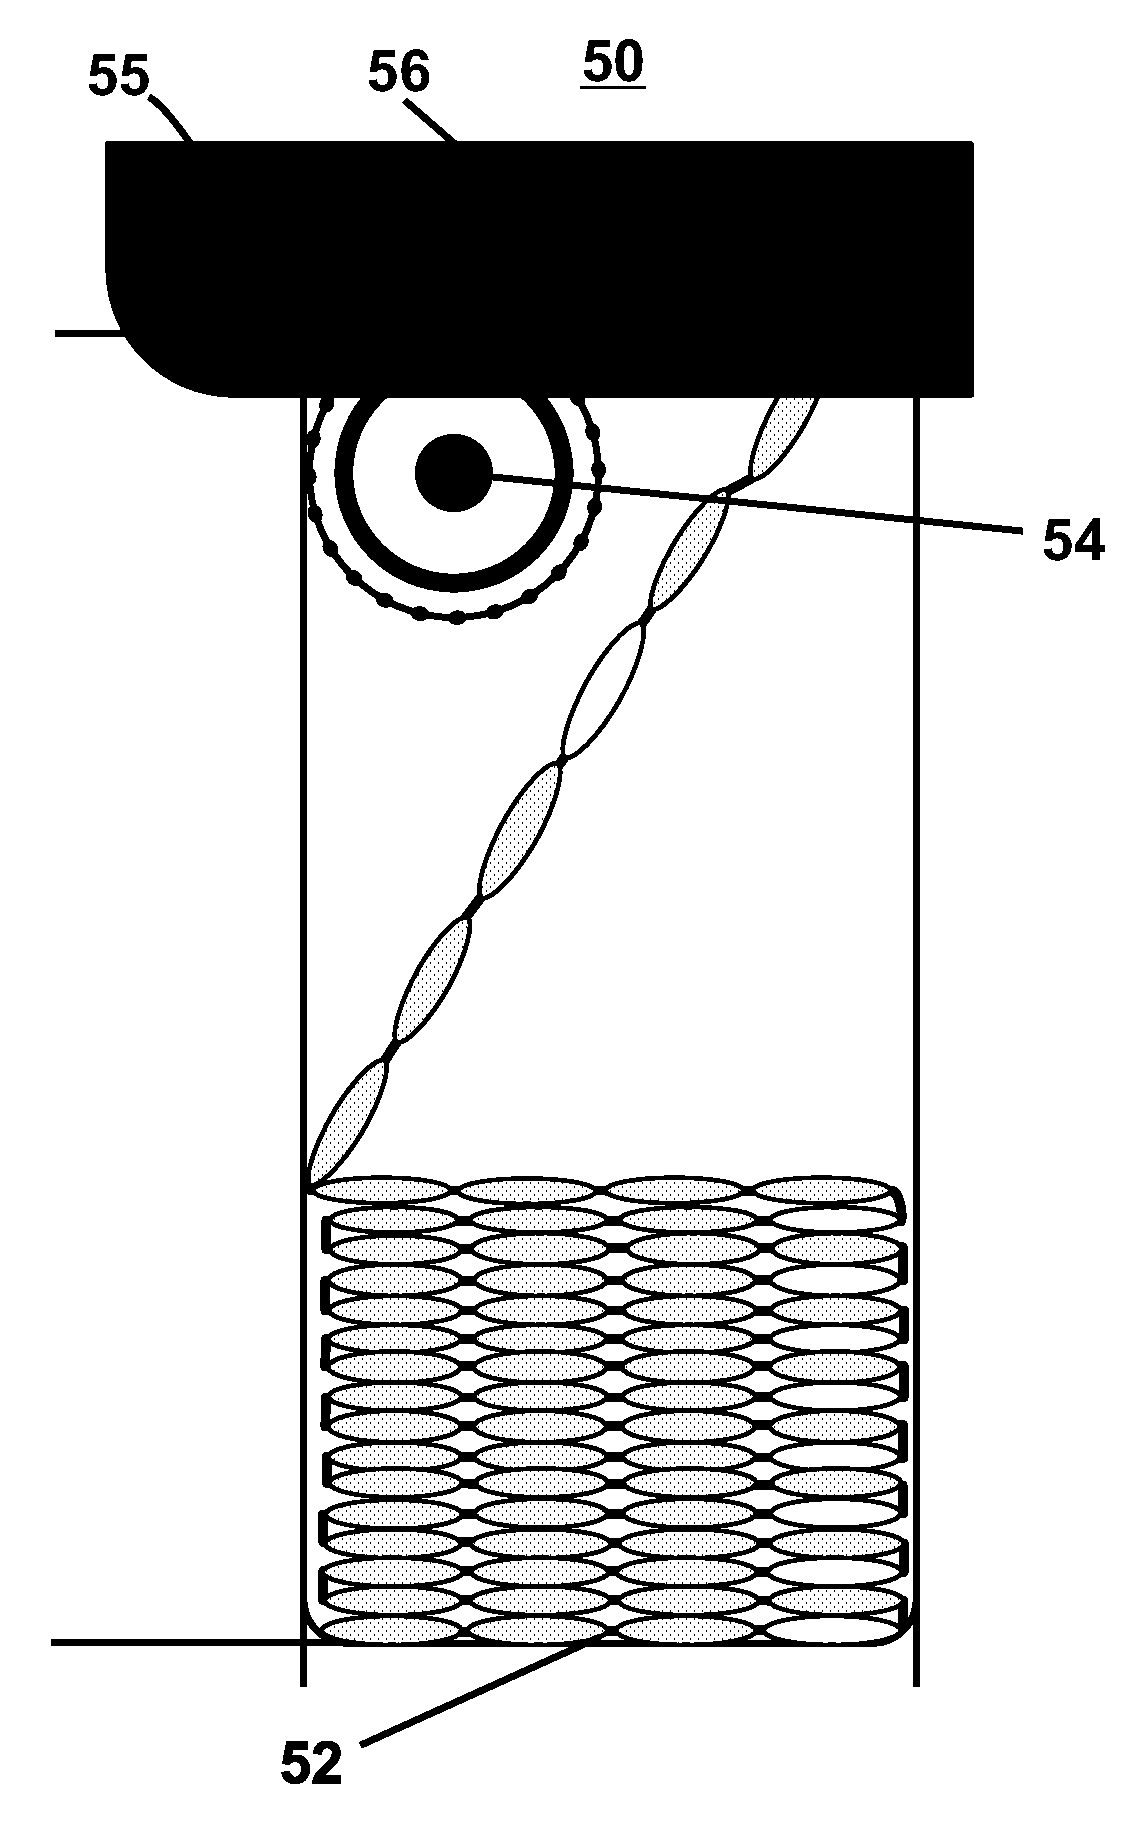 System and method for controlling water quality in a recreational water installation